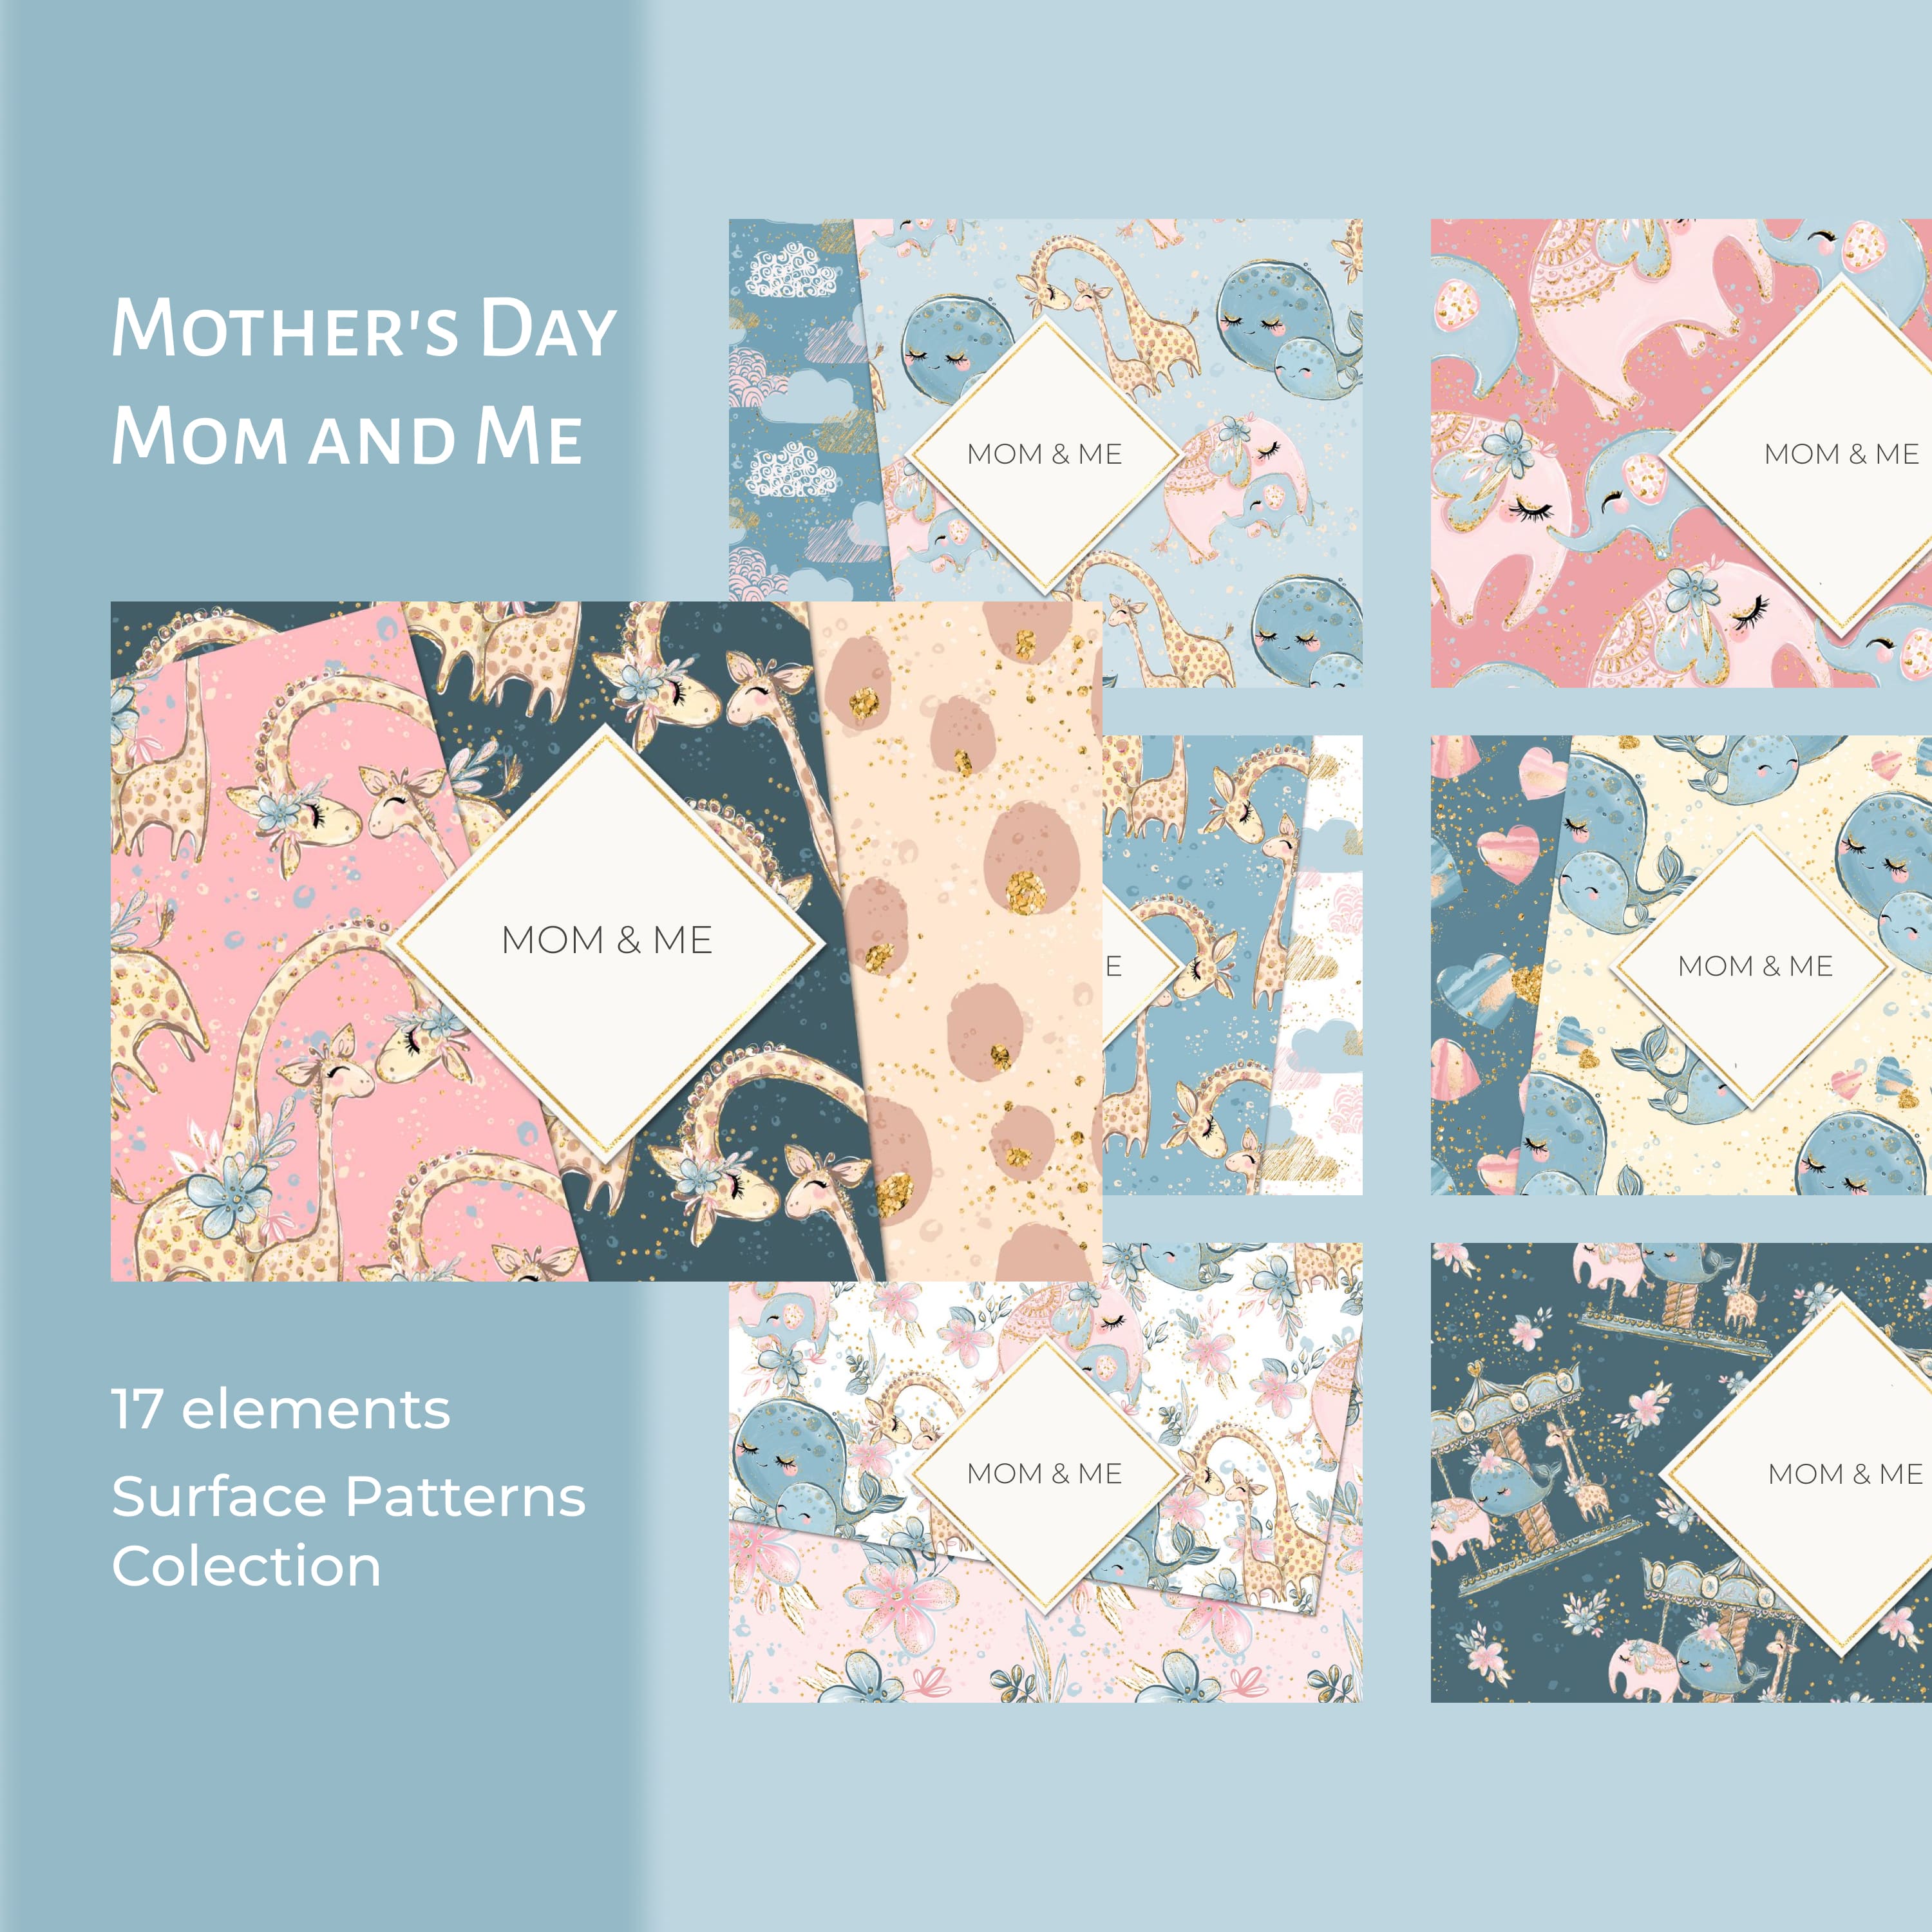 Mother's Day Mom and Me Patterns cover.